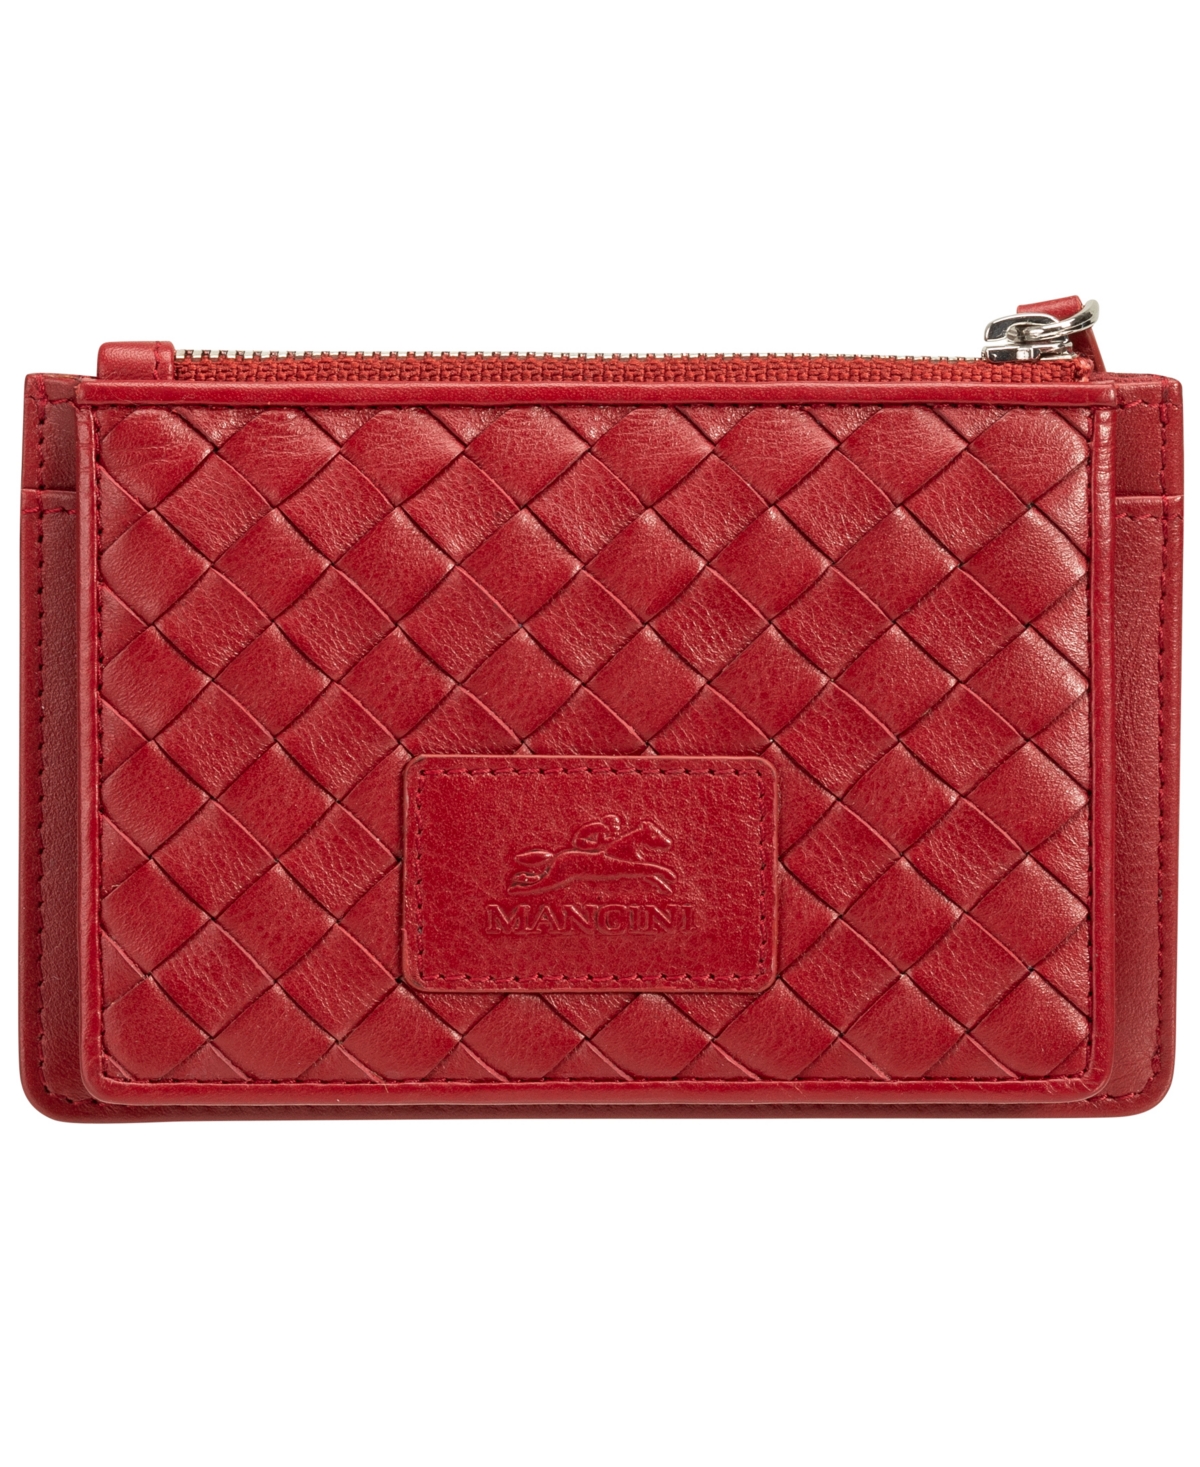 Women's Basket Weave Collection Rfid Secure Card Case and Coin Pocket - Red